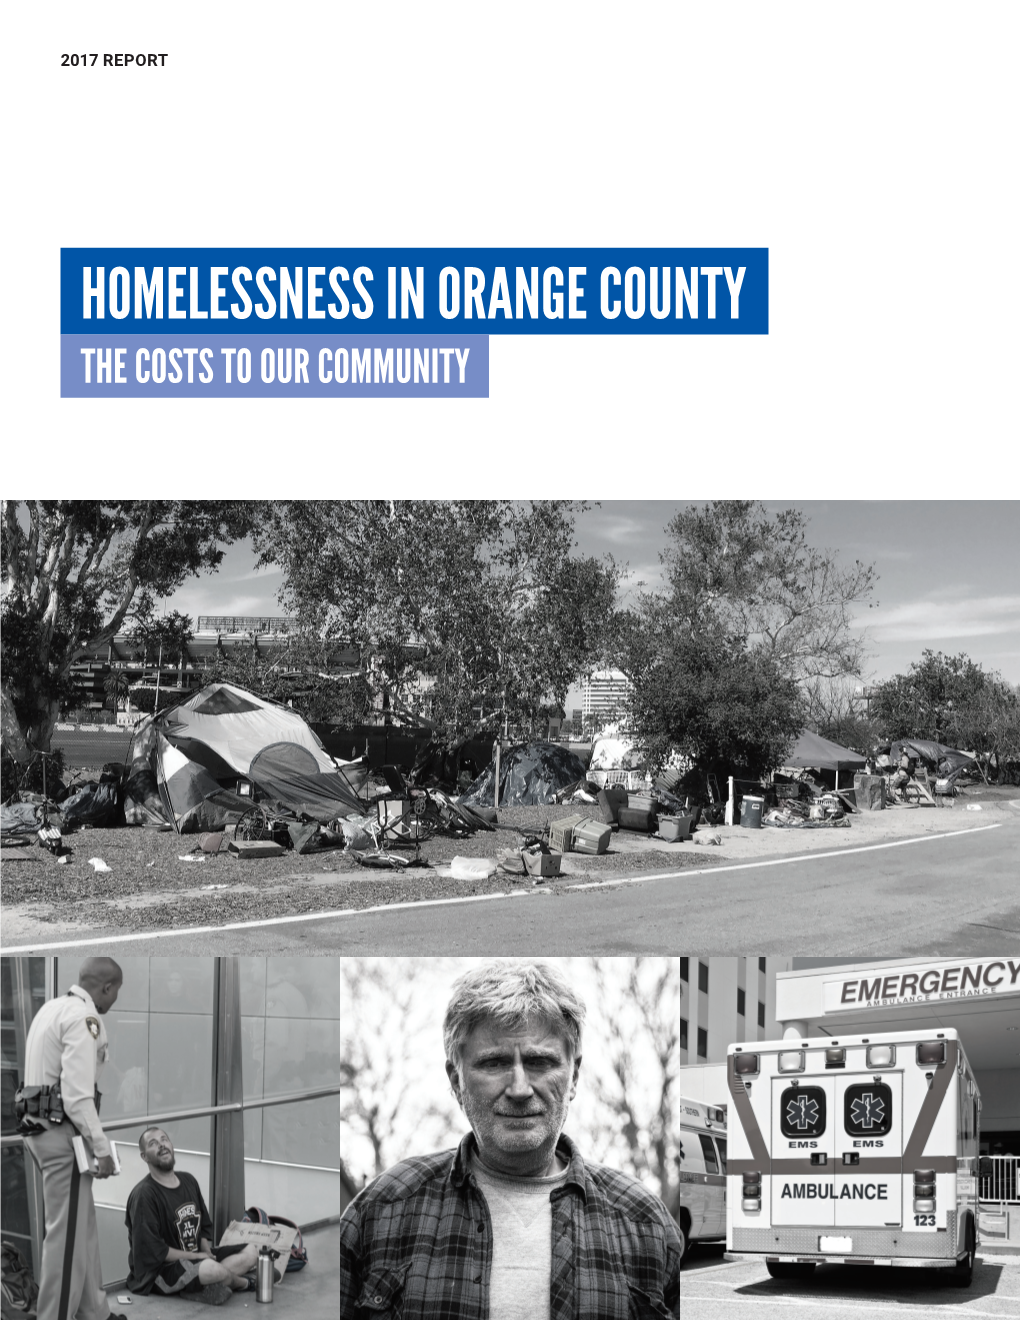 Homelessness in Orange County: the Costs to Our Community